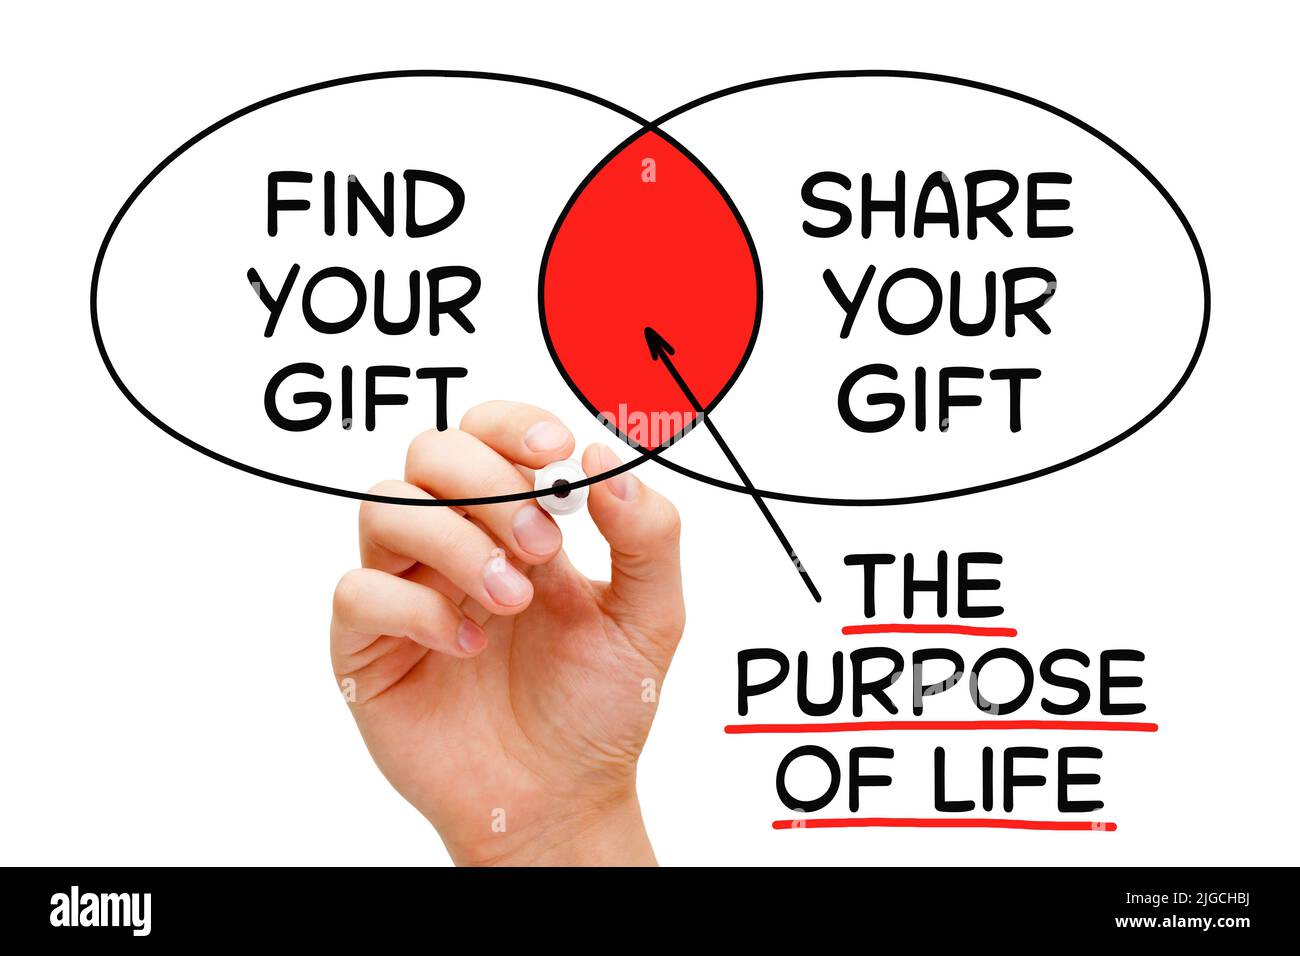 Hand writing Find Your Gift, Share Your Gift on a diagram concept about The Purpose Of Life. Stock Photo